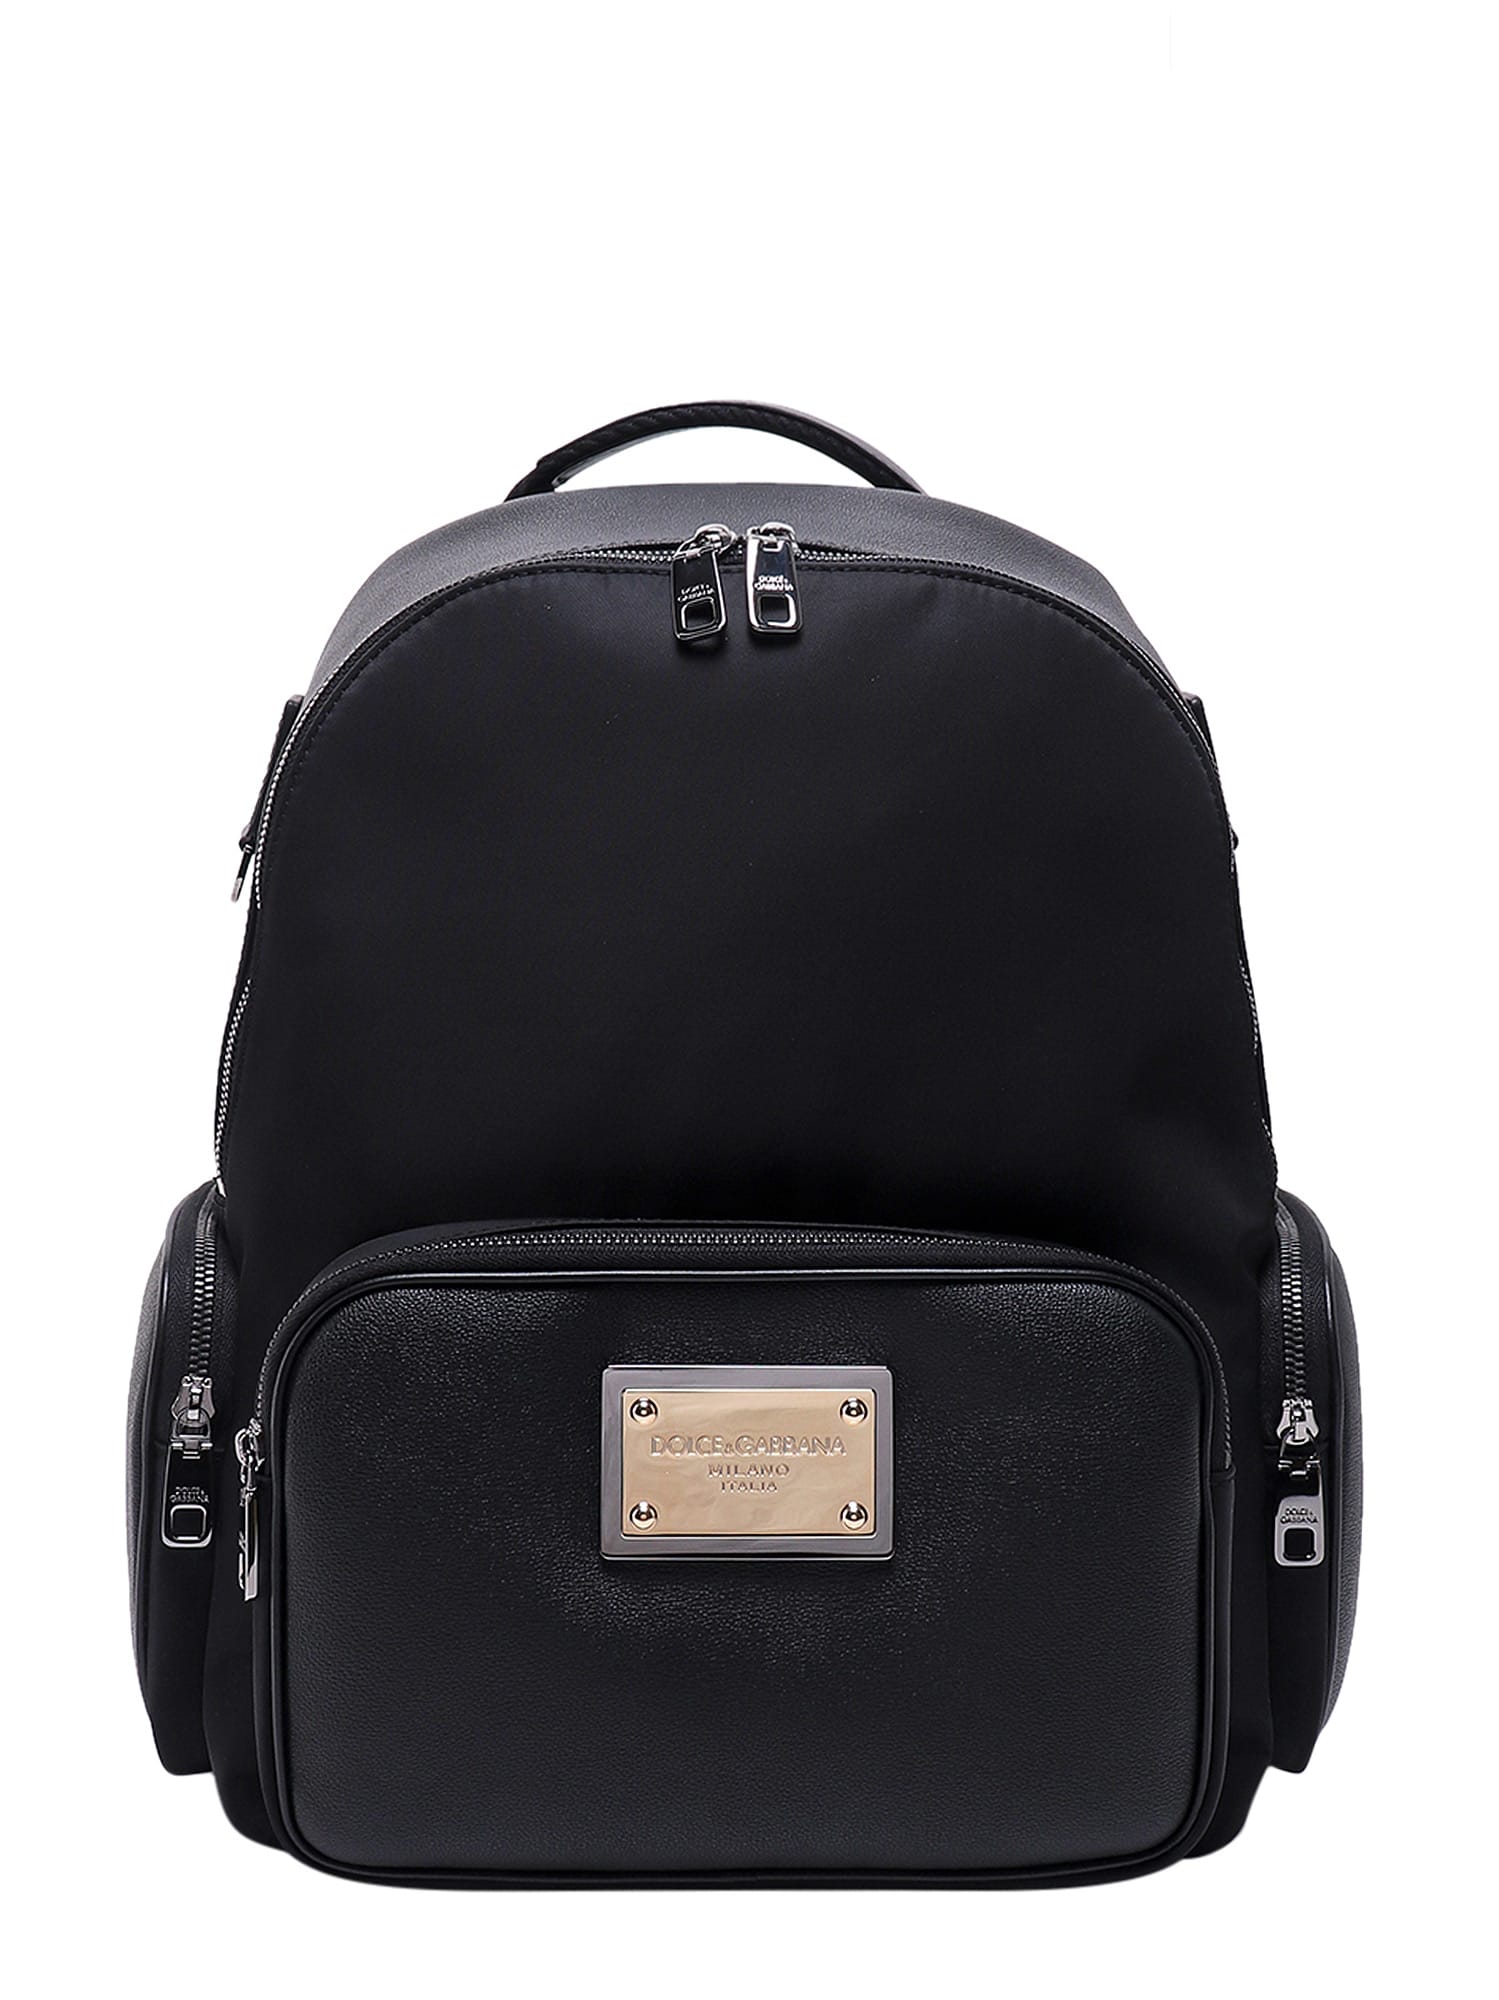 Dolce Backpack | italist